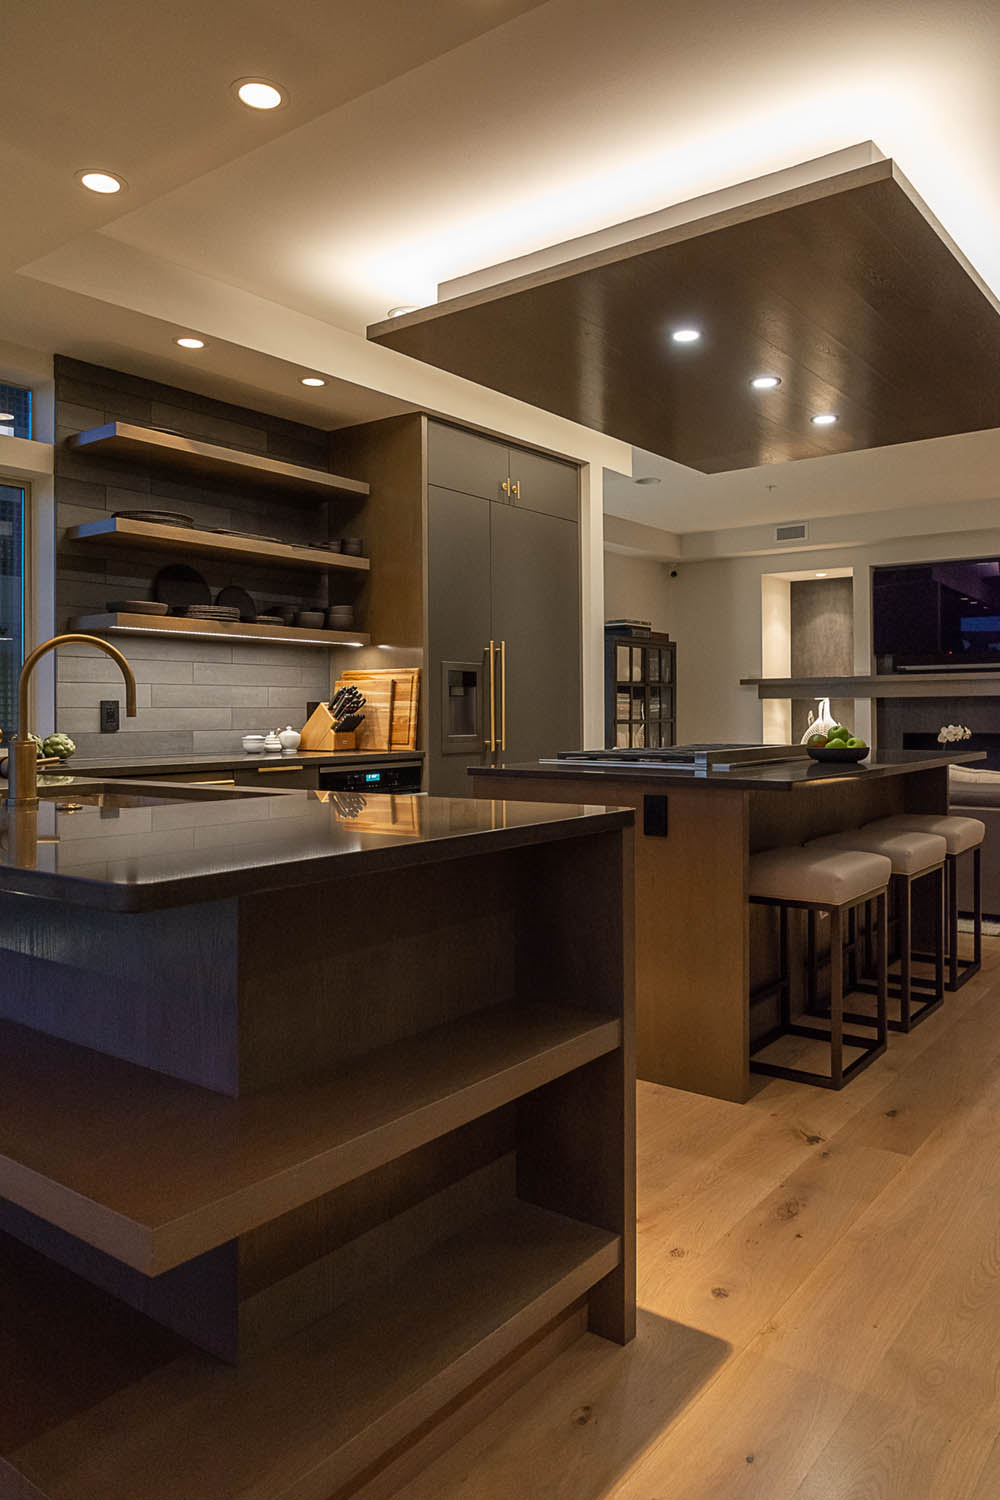 Modern luxury: whole-home remodel with open layout, high-end finishes, and harmonious design.